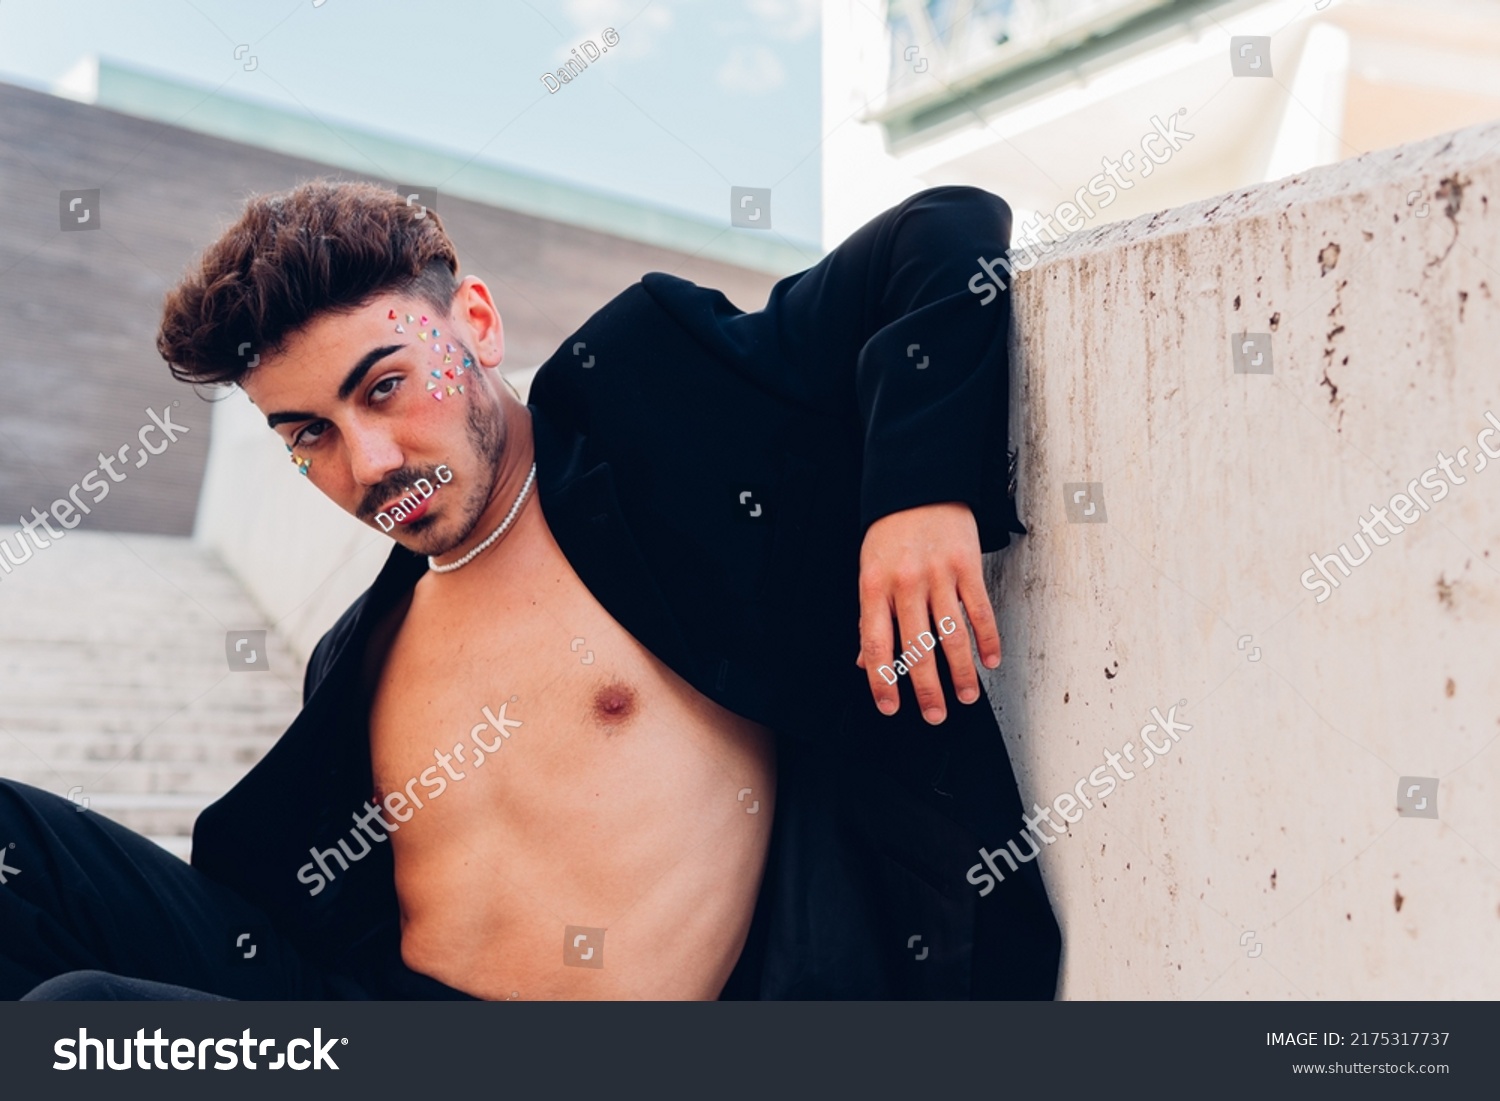 Eccentric Male Rhinestones On Face Naked Stock Photo Shutterstock